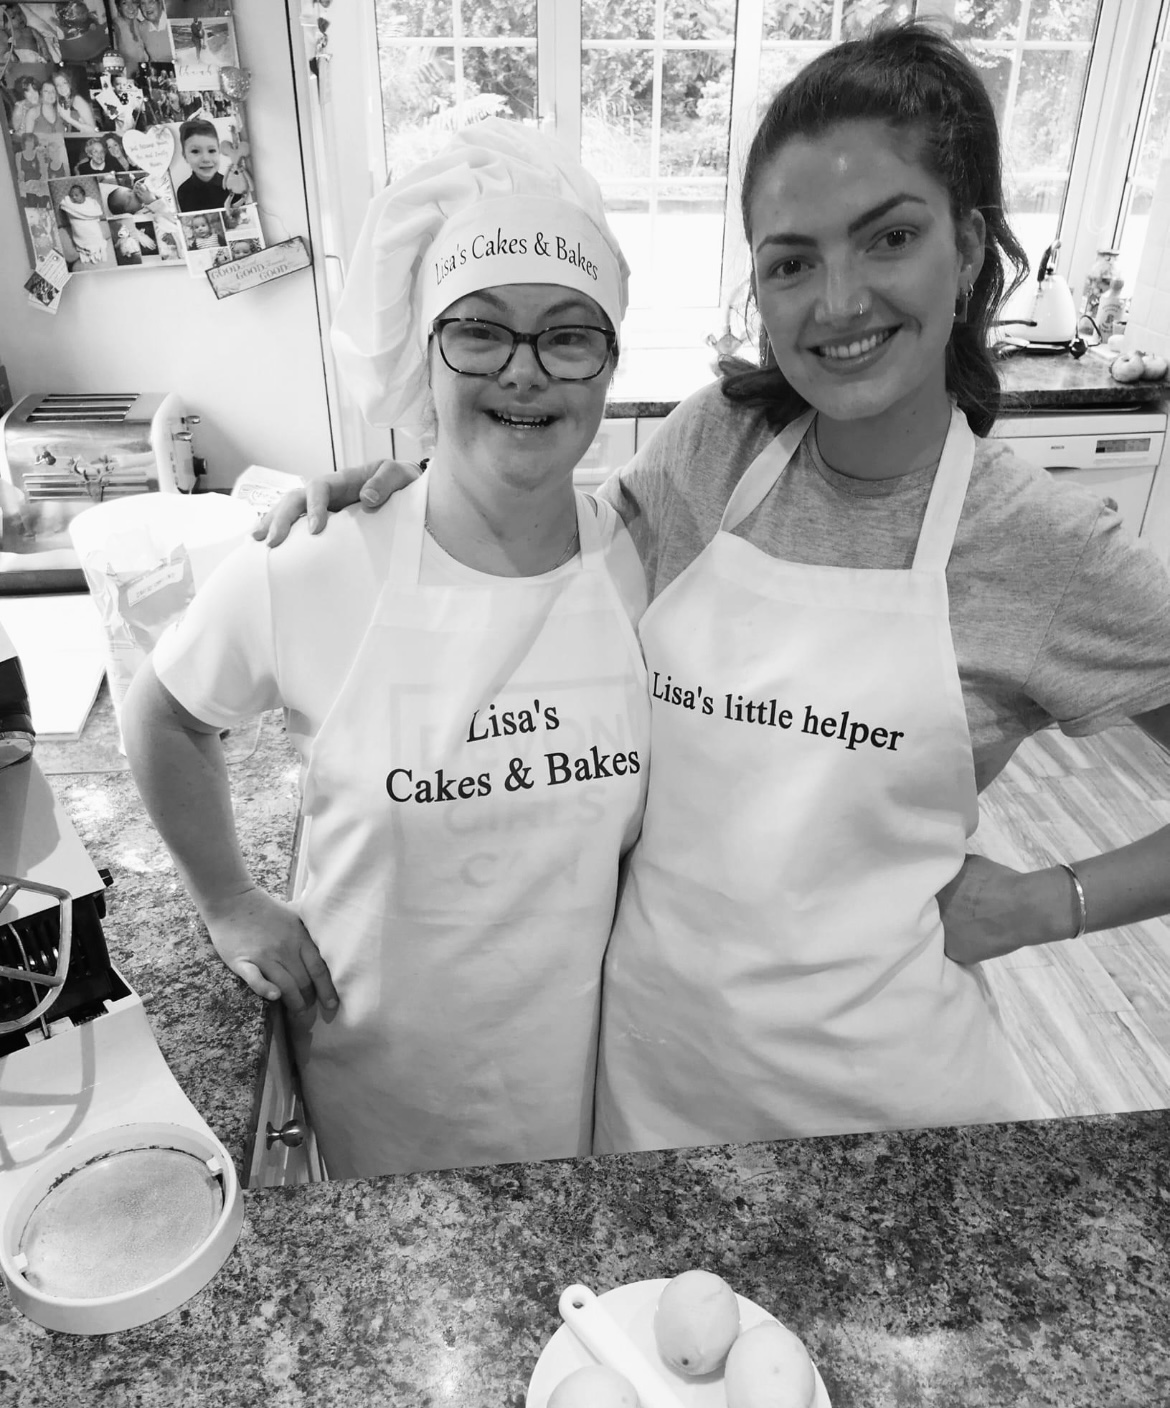 Two women wearing cooking aprons